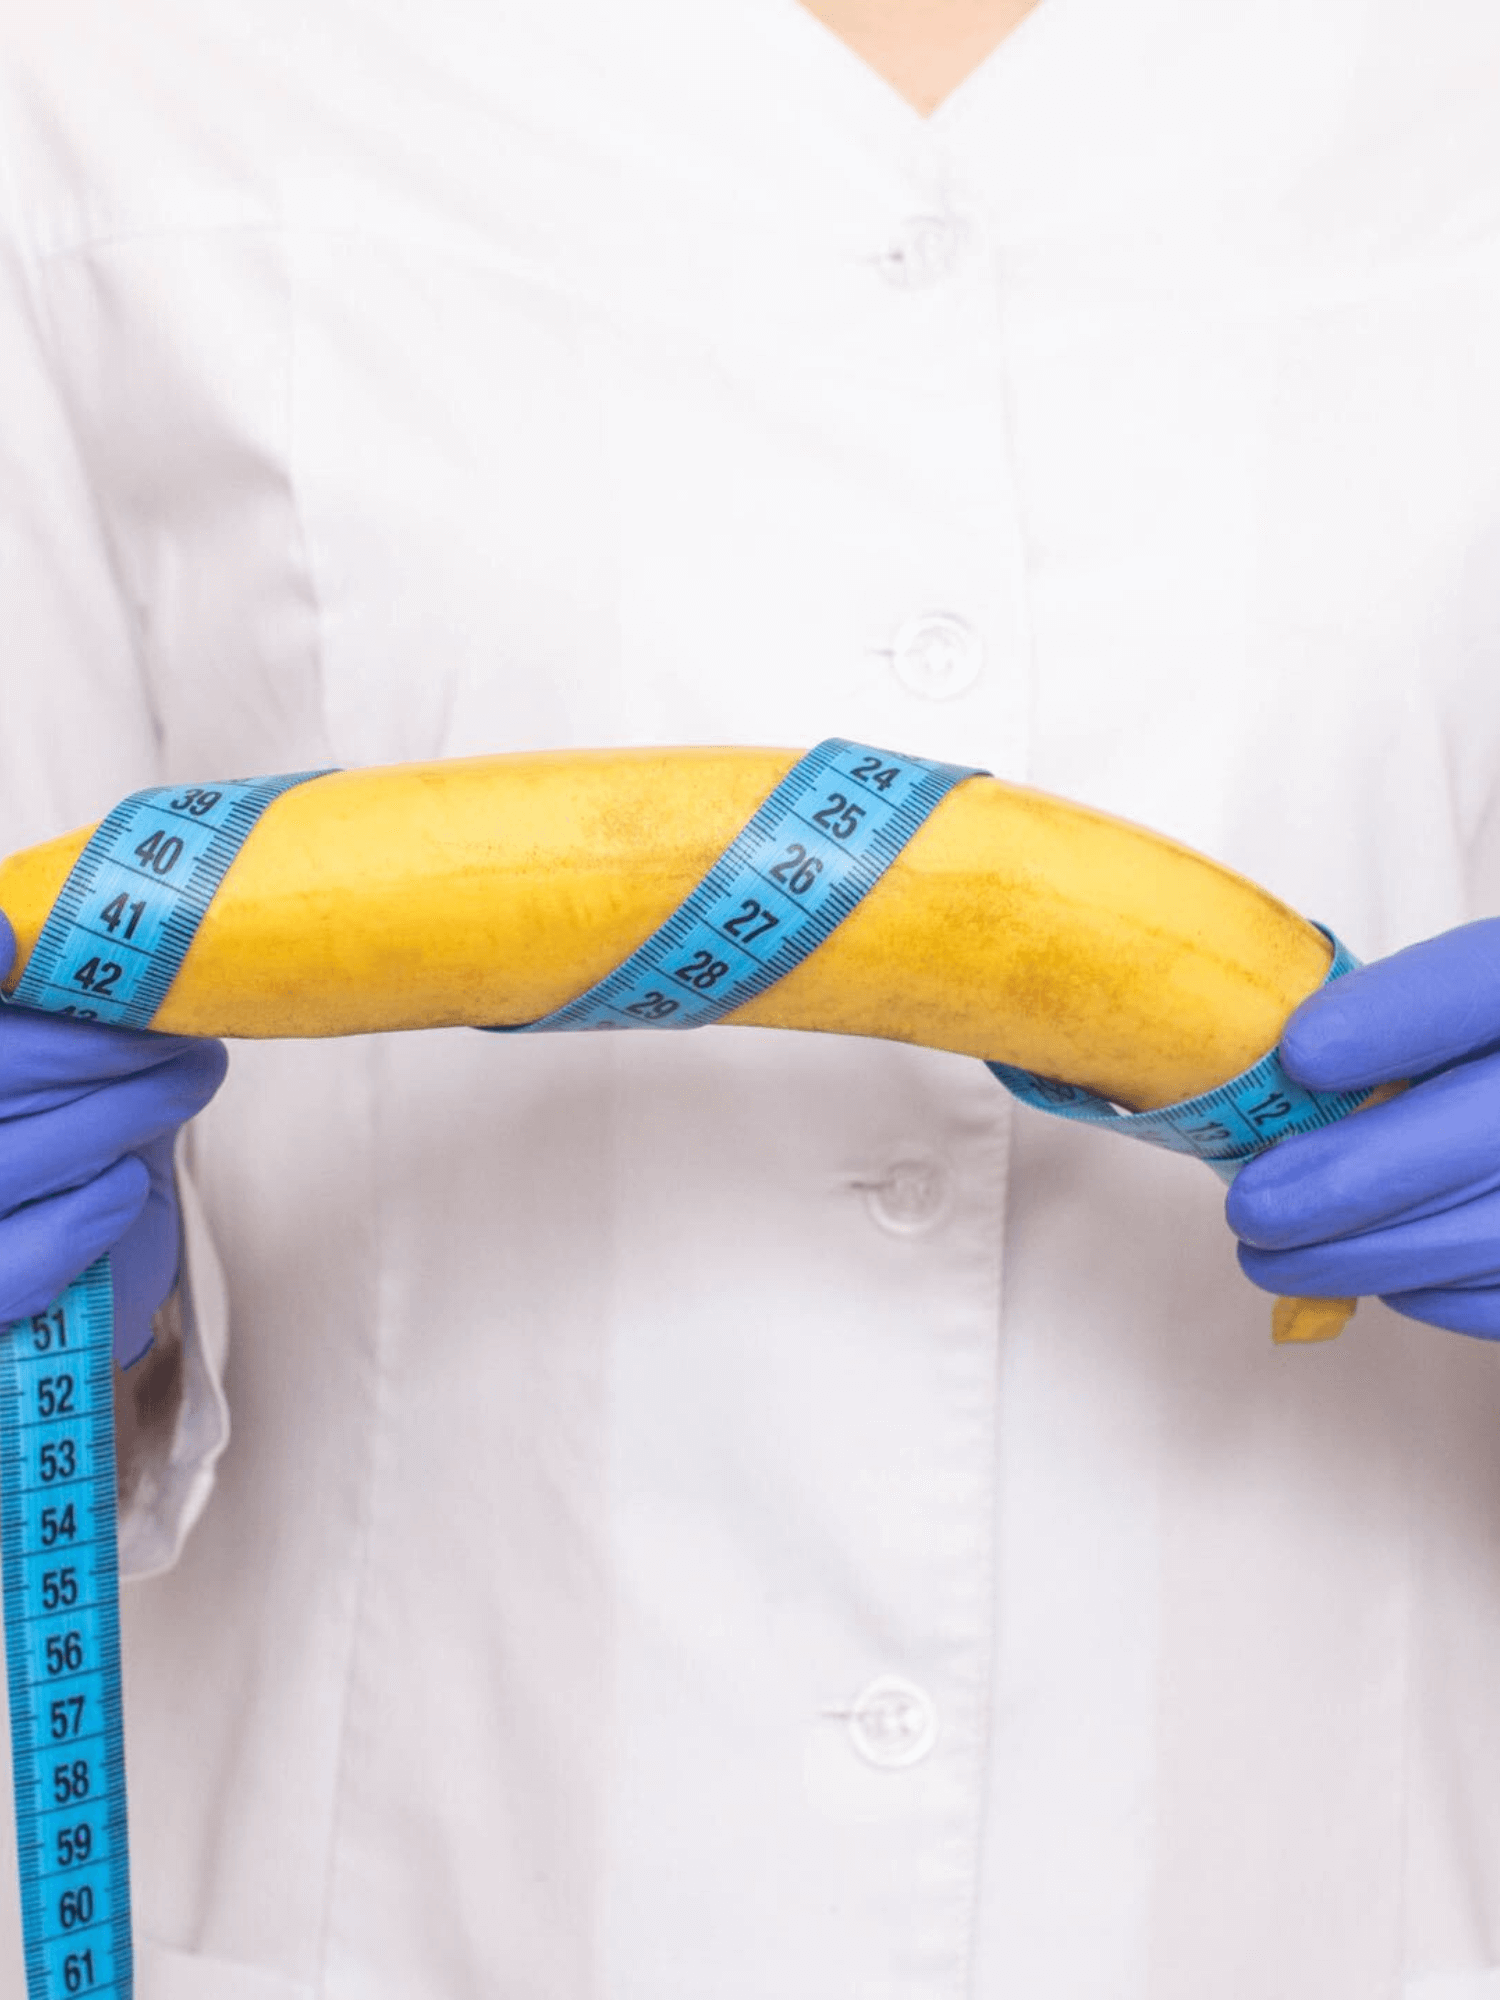 An image of a doctor holding a banana with measuring tape wrapped around it